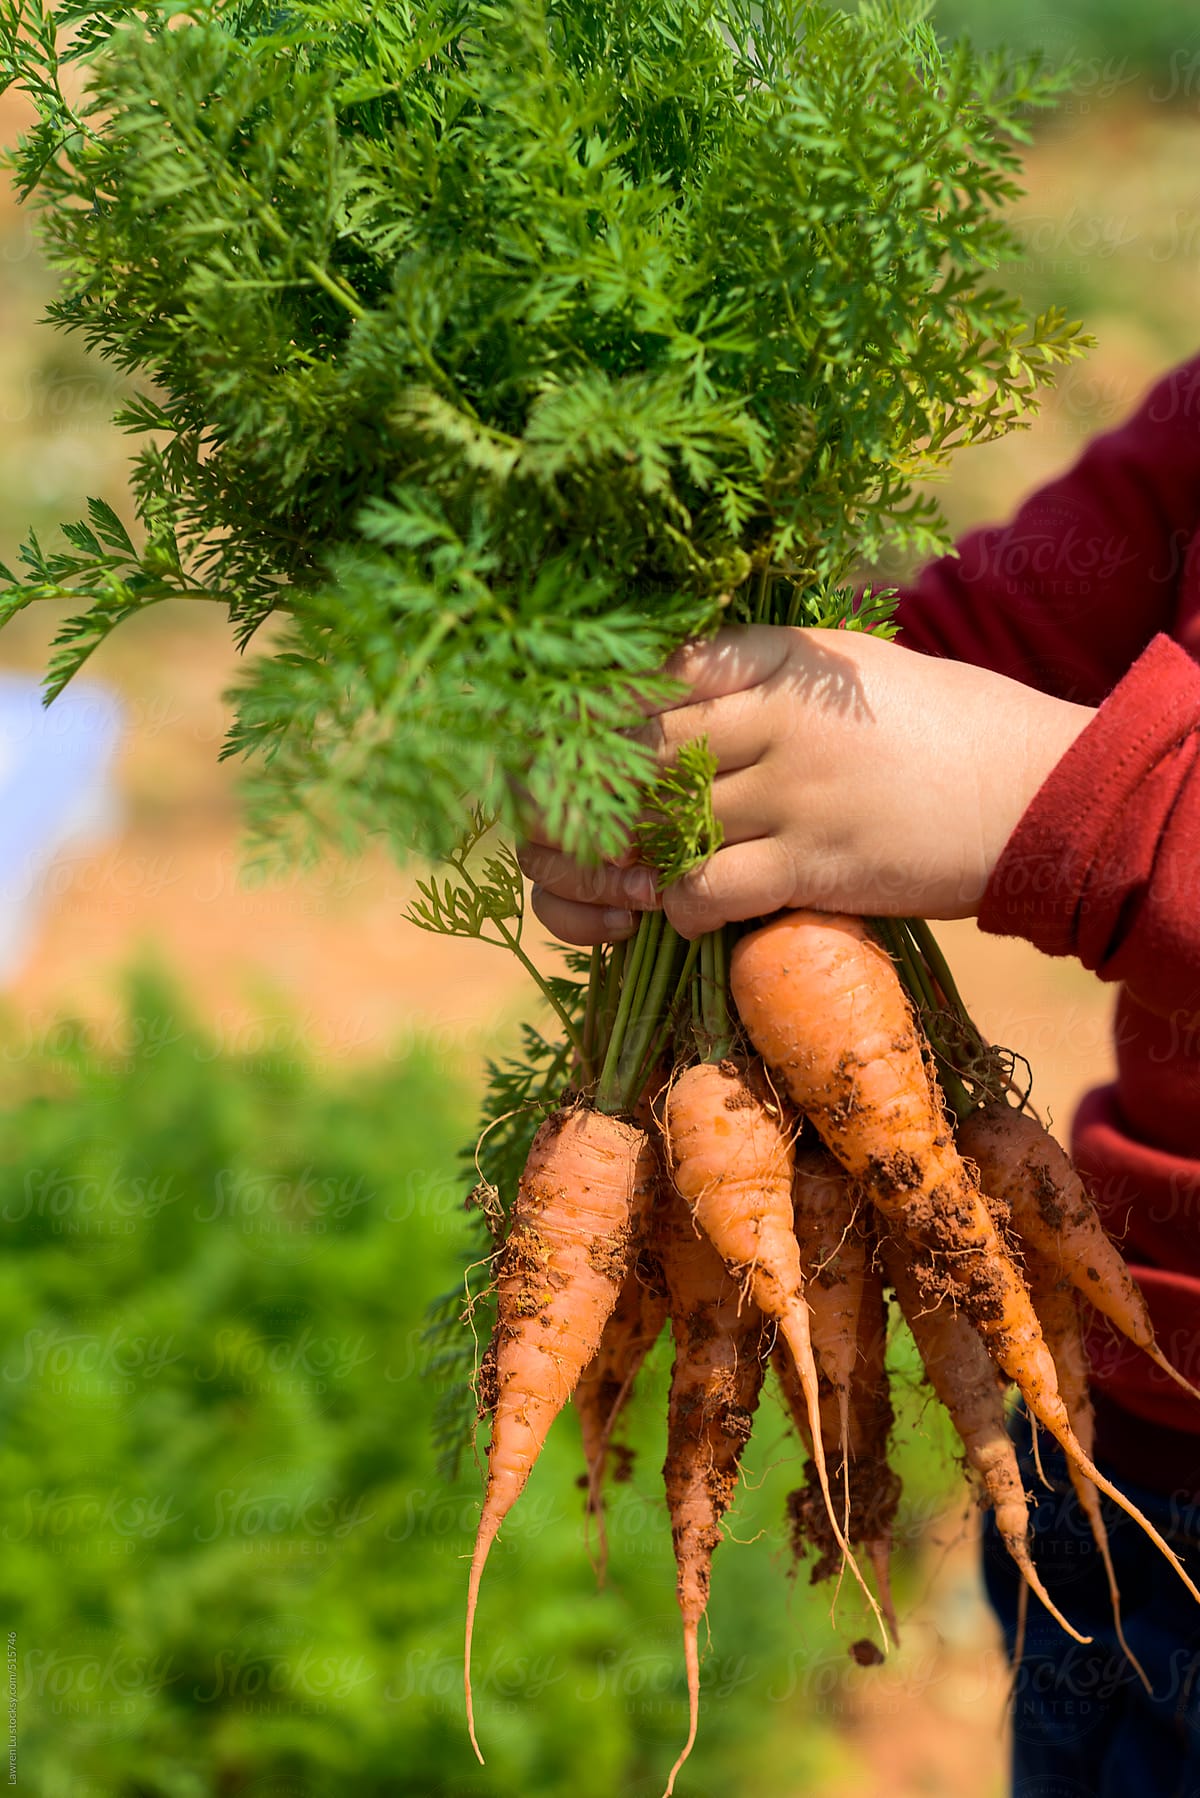 kid holding a freshly harvested carrot with earth still clinging to it outdoors